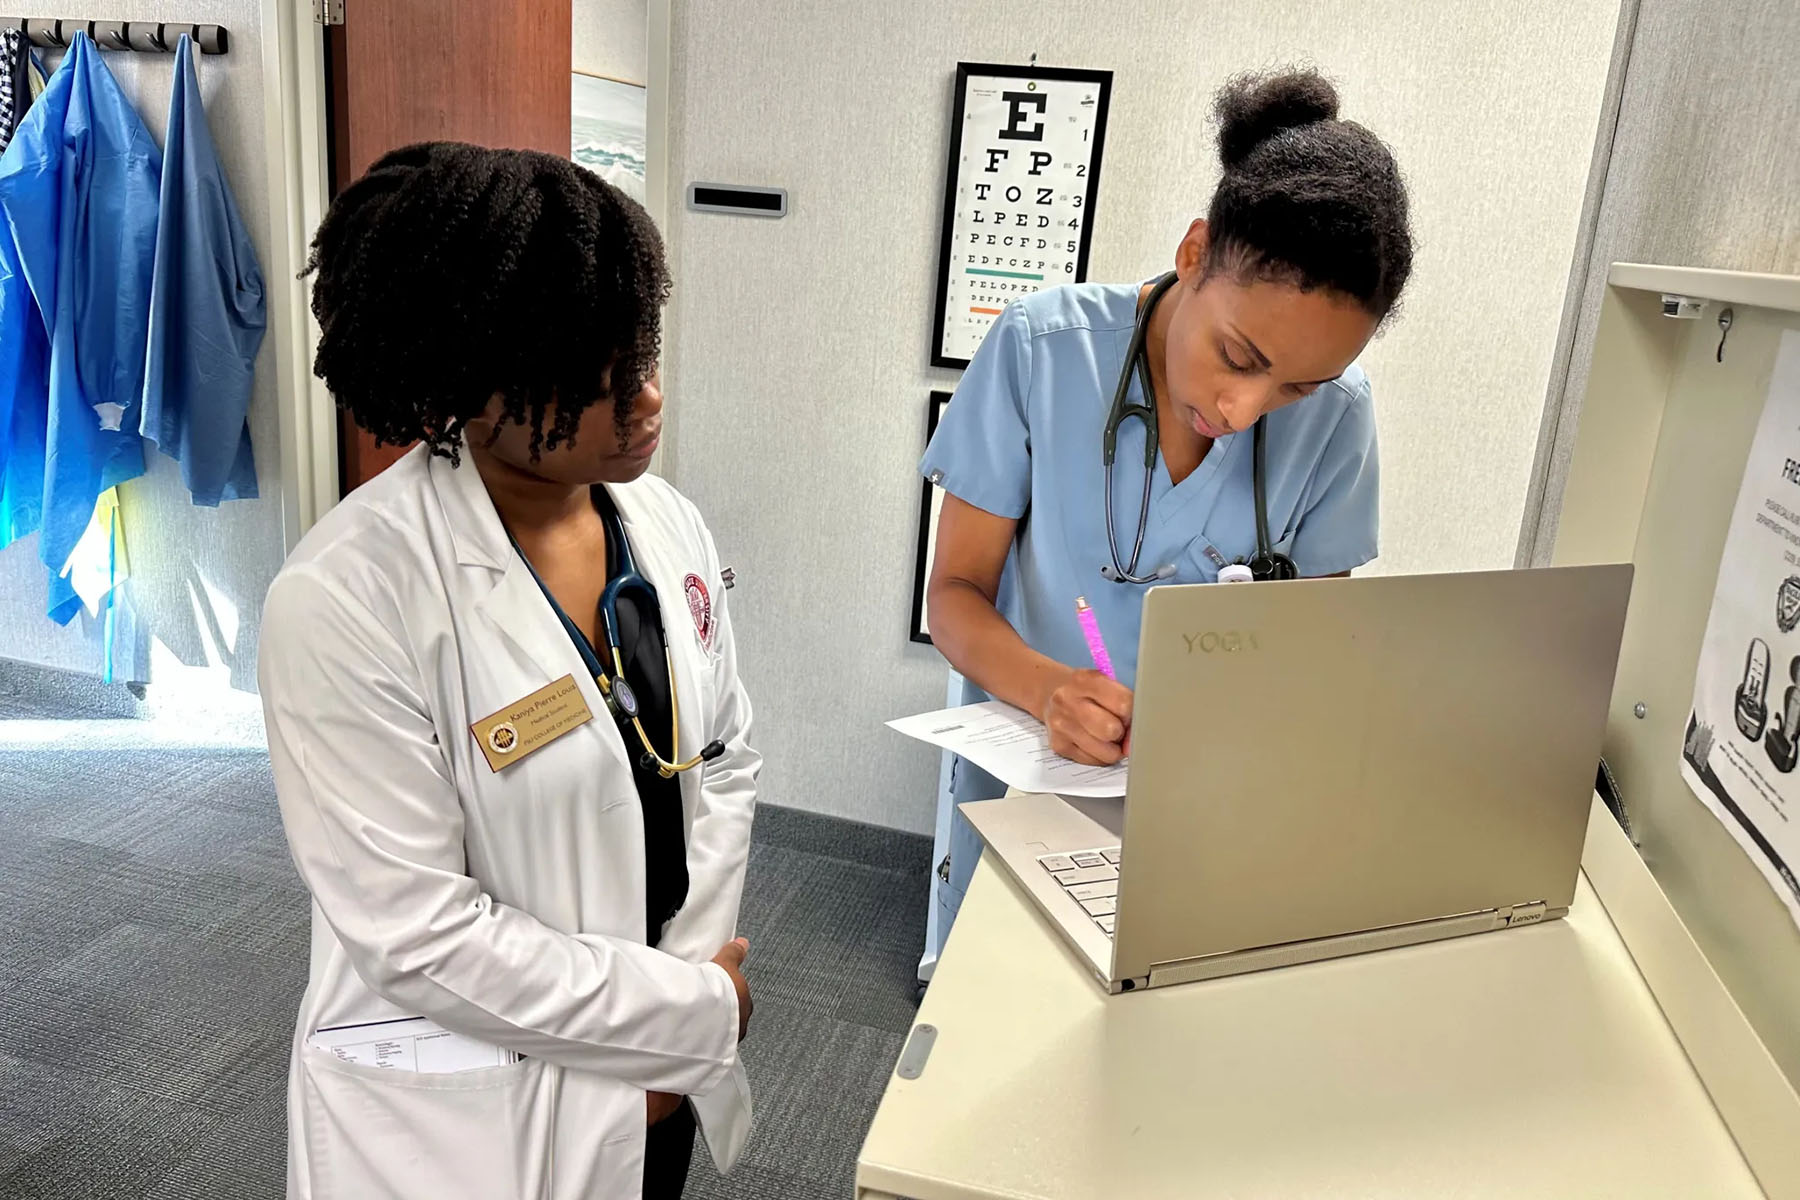 A medical student is seen shadowing family medicine physician Zita Magloire.